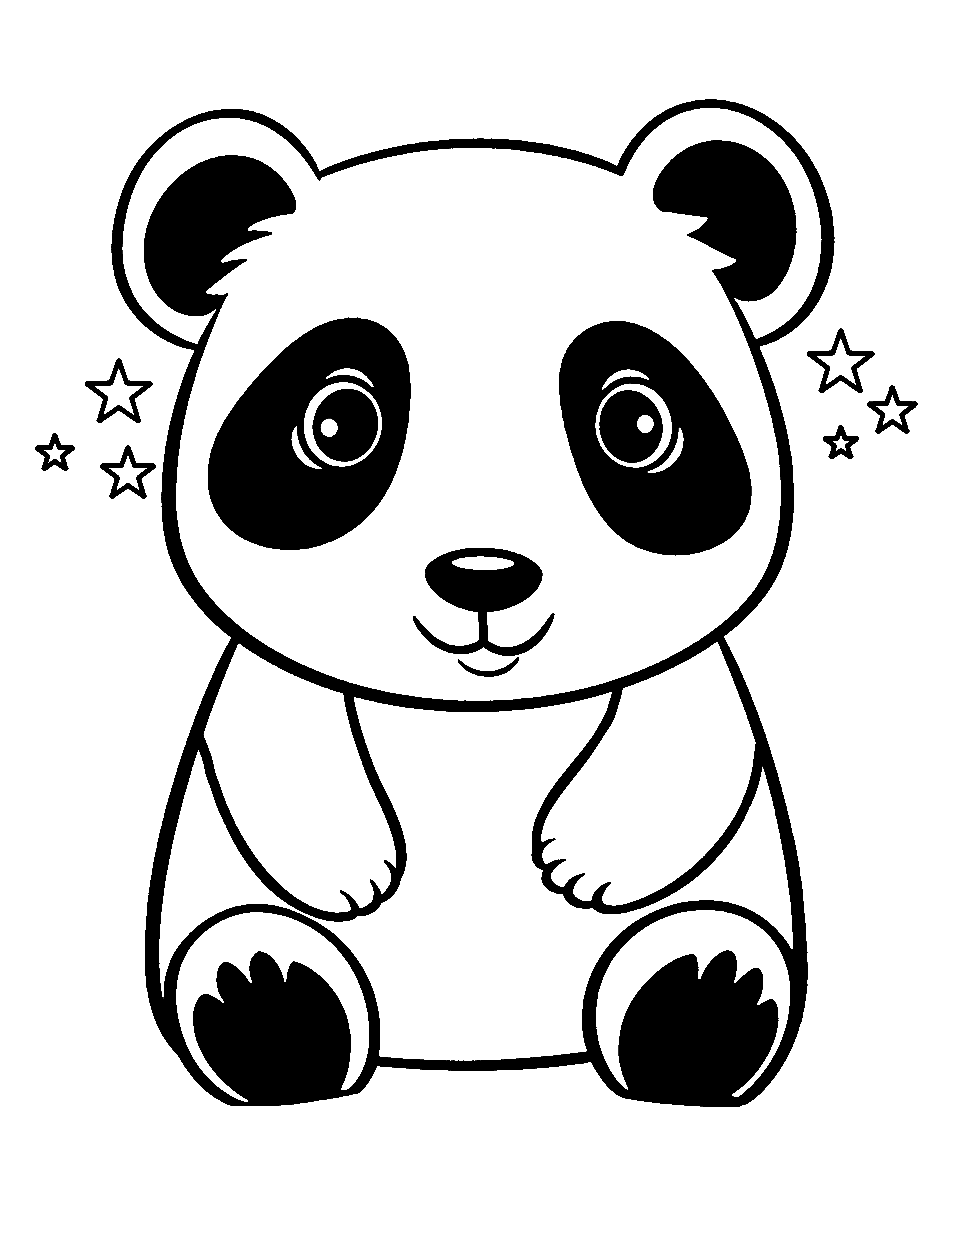 Panda with Big Eyes Coloring Page - An adorable panda with exceptionally big, sparkly eyes creating a focal point for coloring.